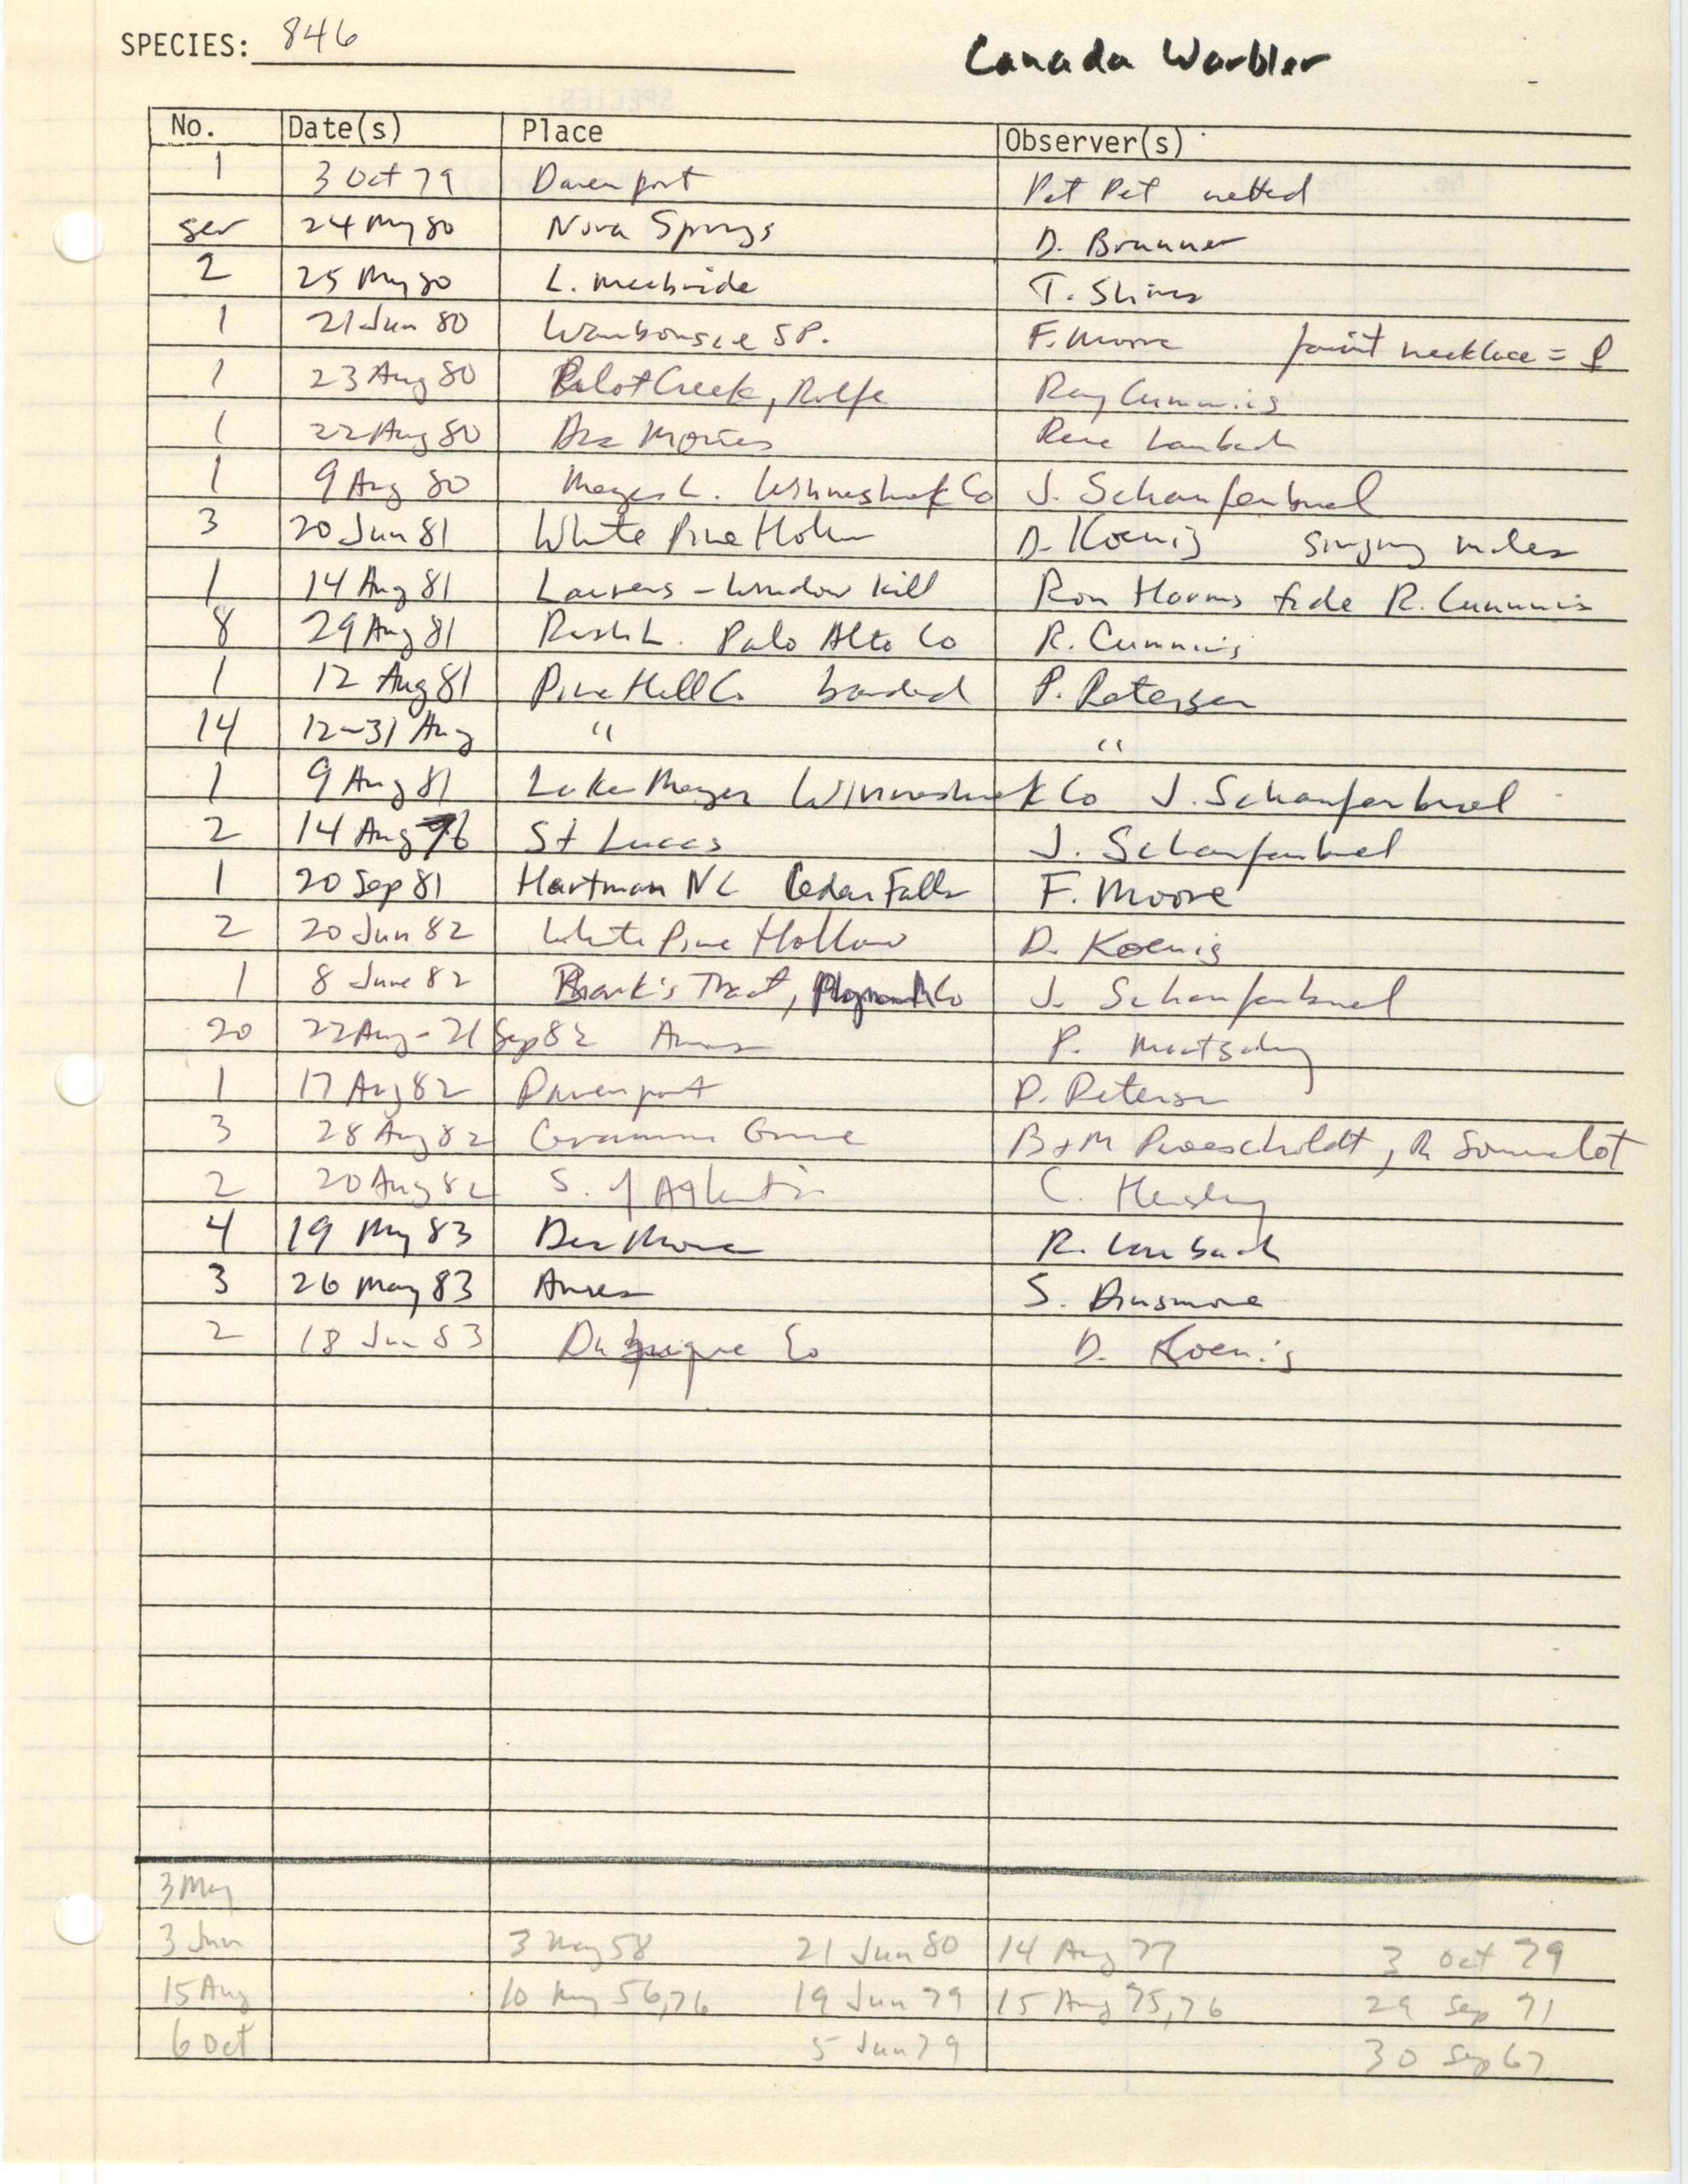 Iowa Ornithologists' Union, field report compiled data, Canada Warbler, 1976-1983